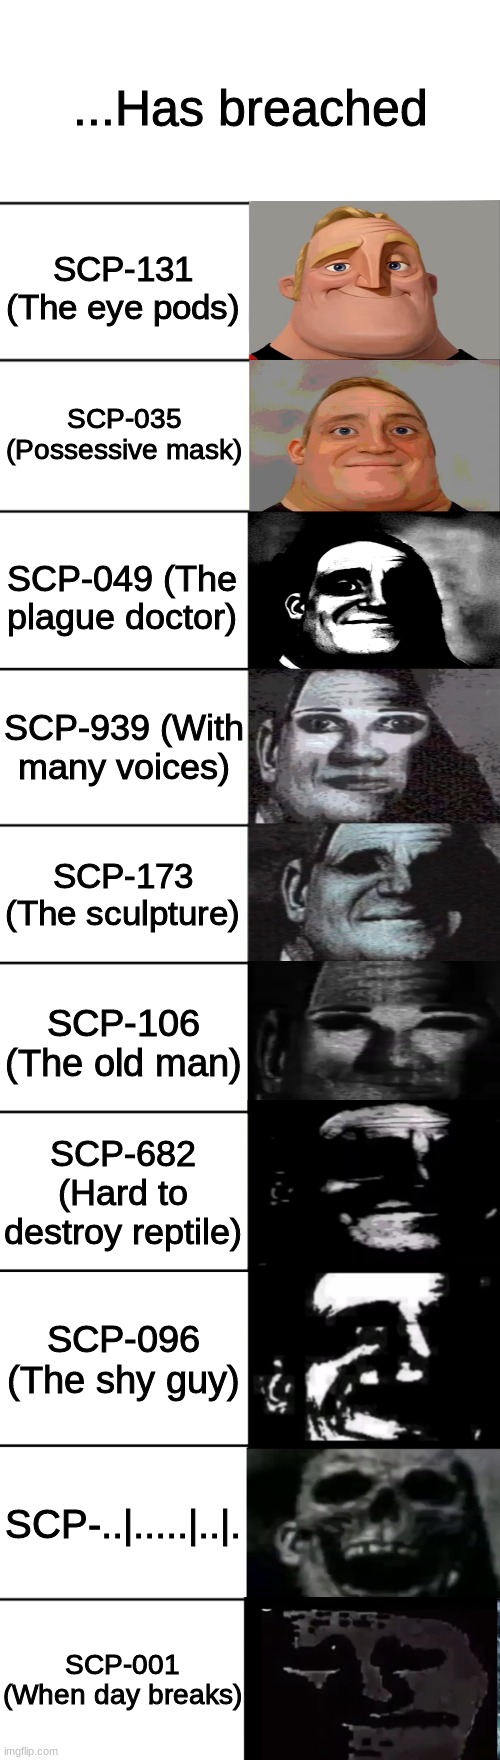 scp-007 and scp-066 and scp-049 vs scp-001